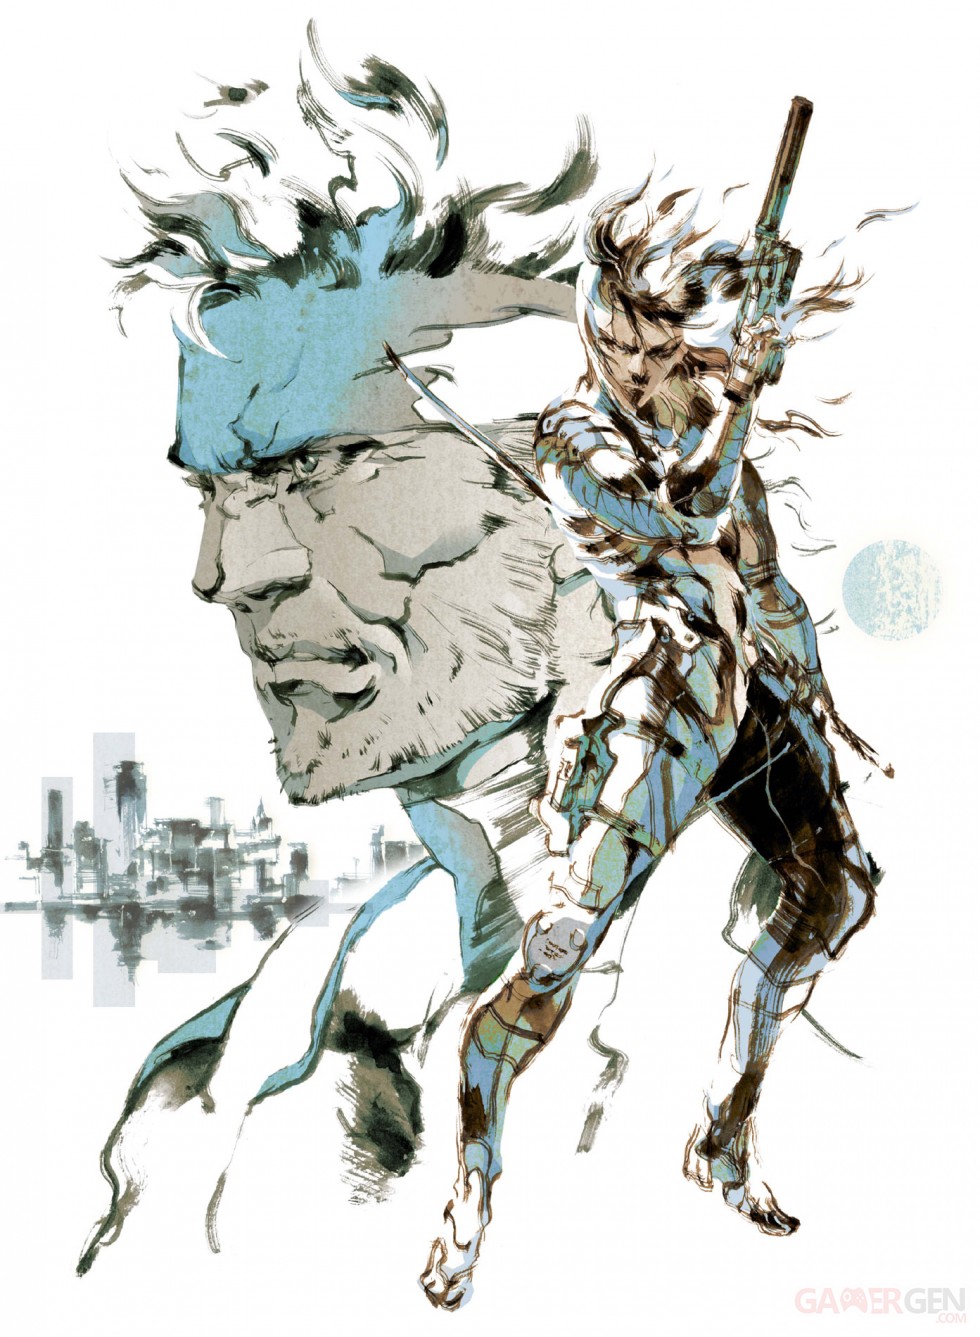 Metal-Gear-Solid-HD-Collection_17-08-2011_art-7